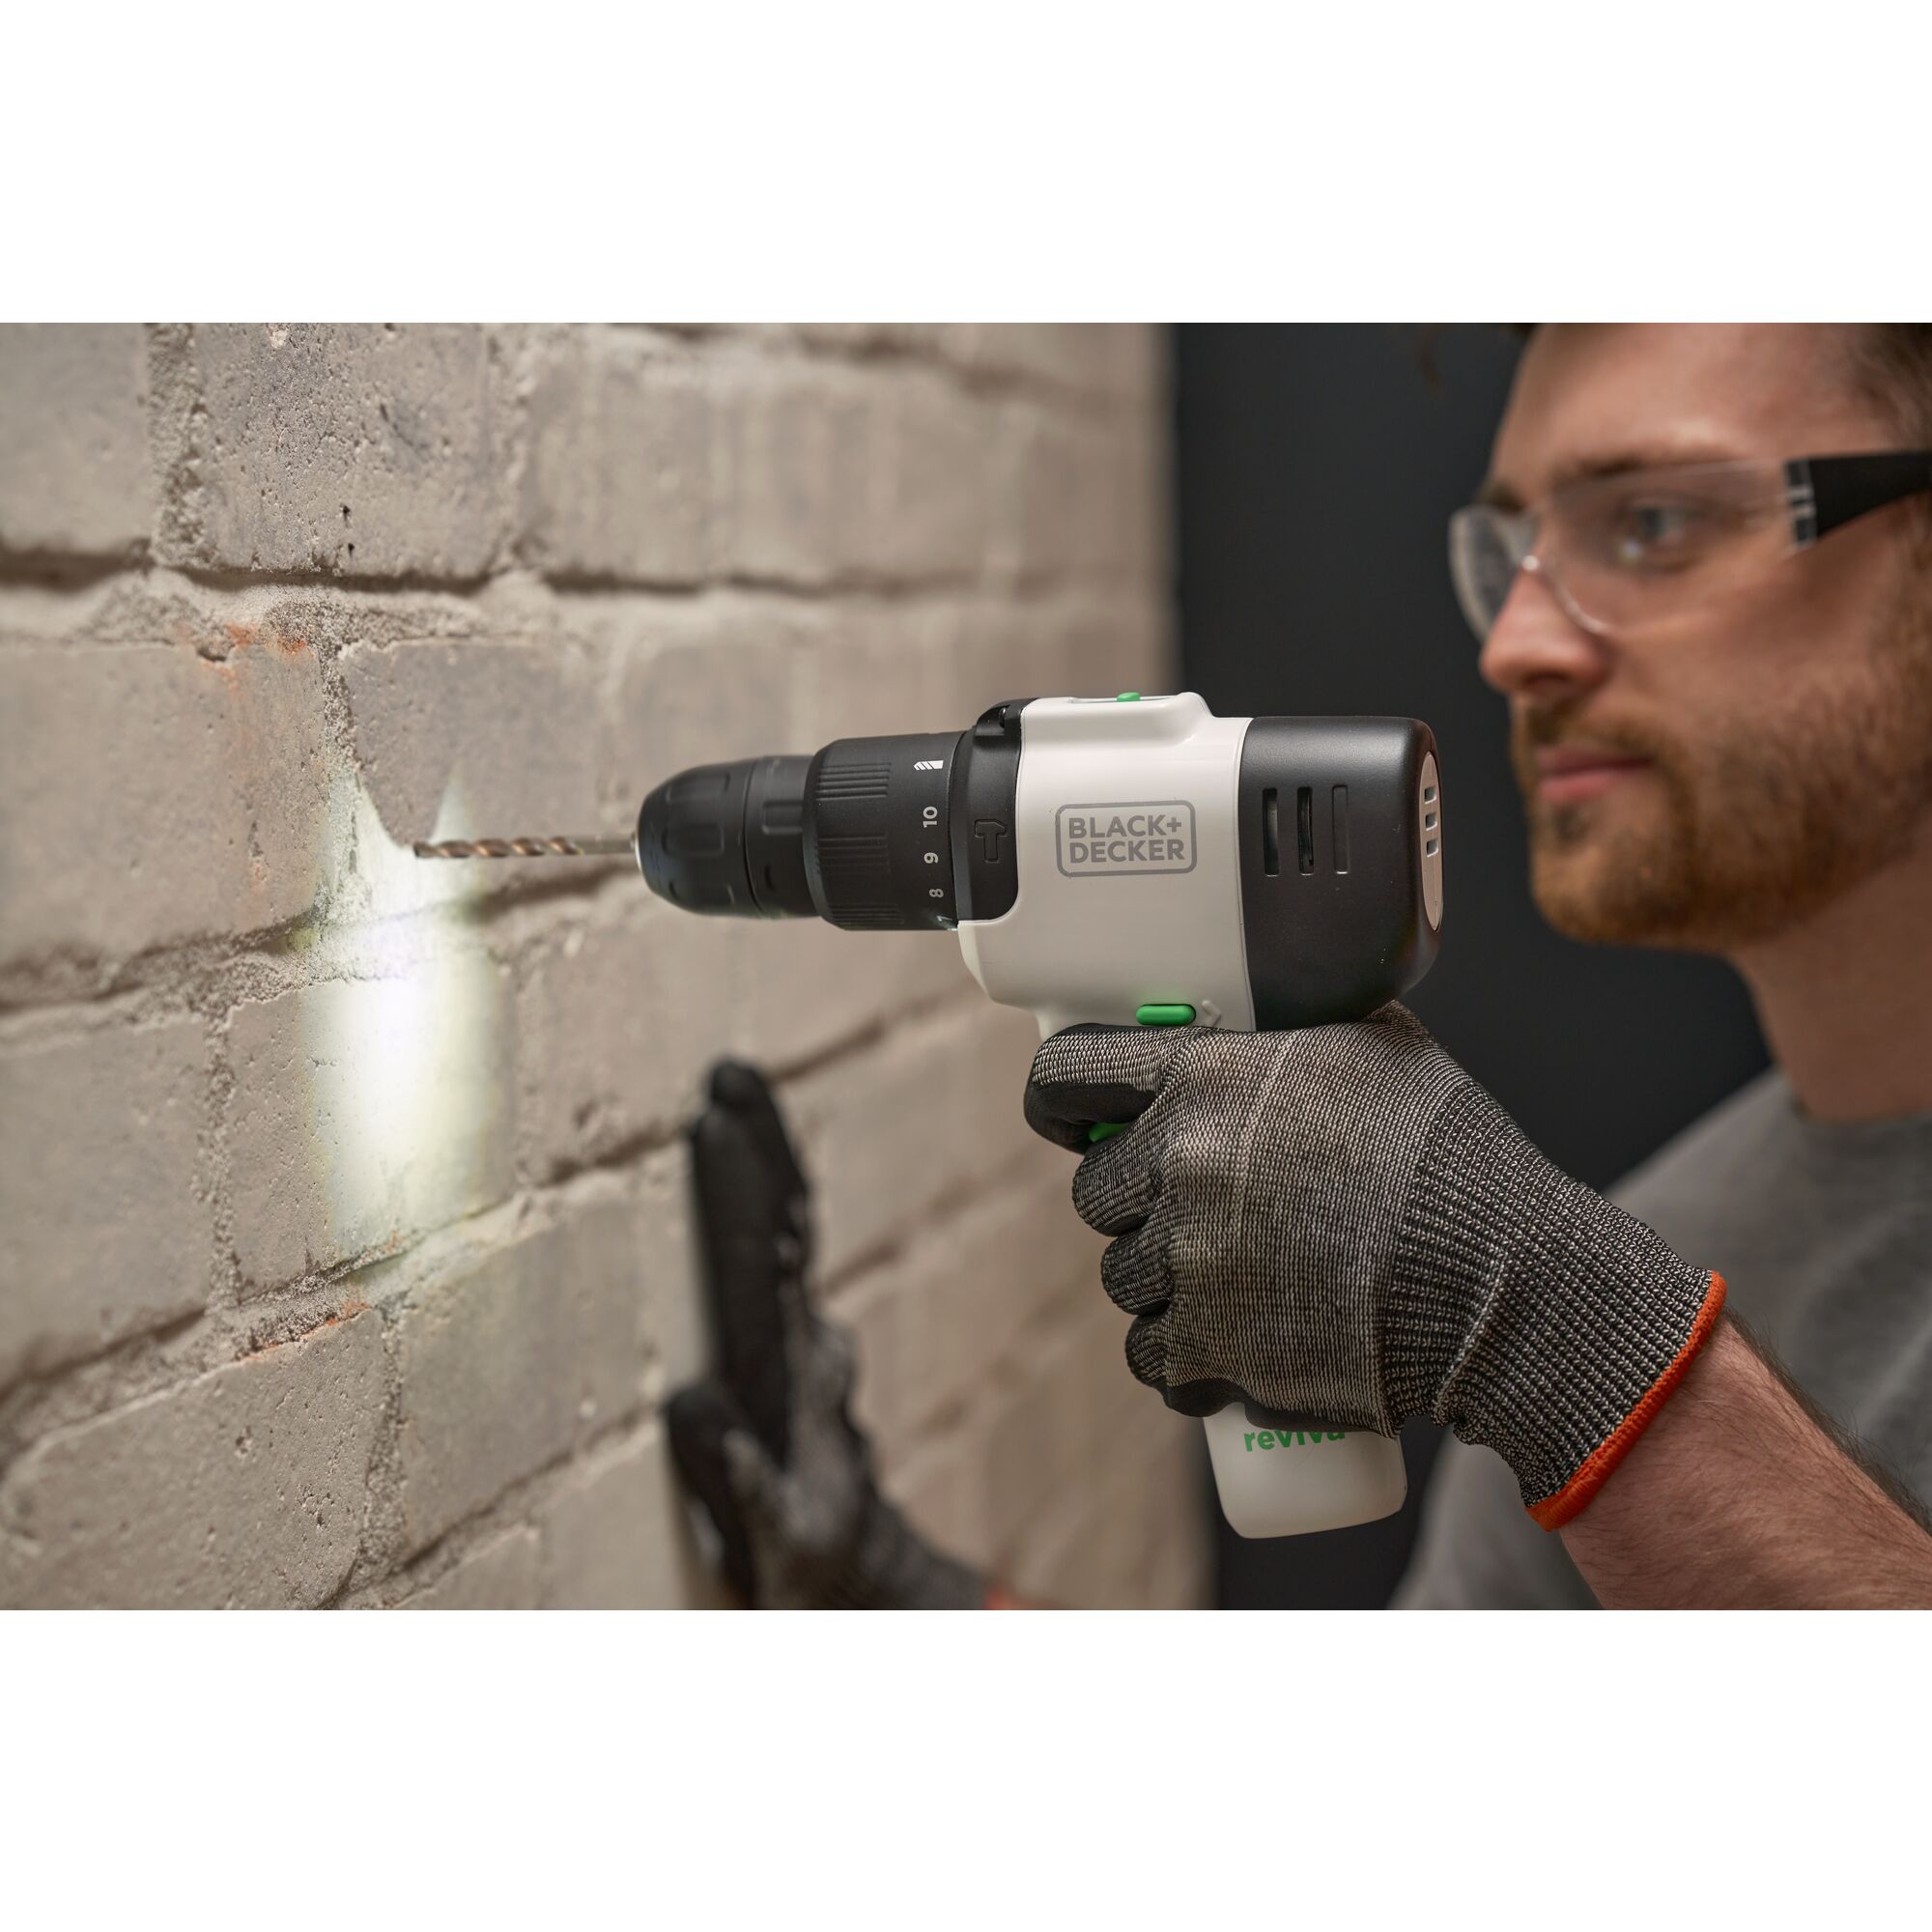 Man using reviva™ 12V MAX* Hammer Drill/Driver to drill into brick with the LED light to illuminate the workspace.